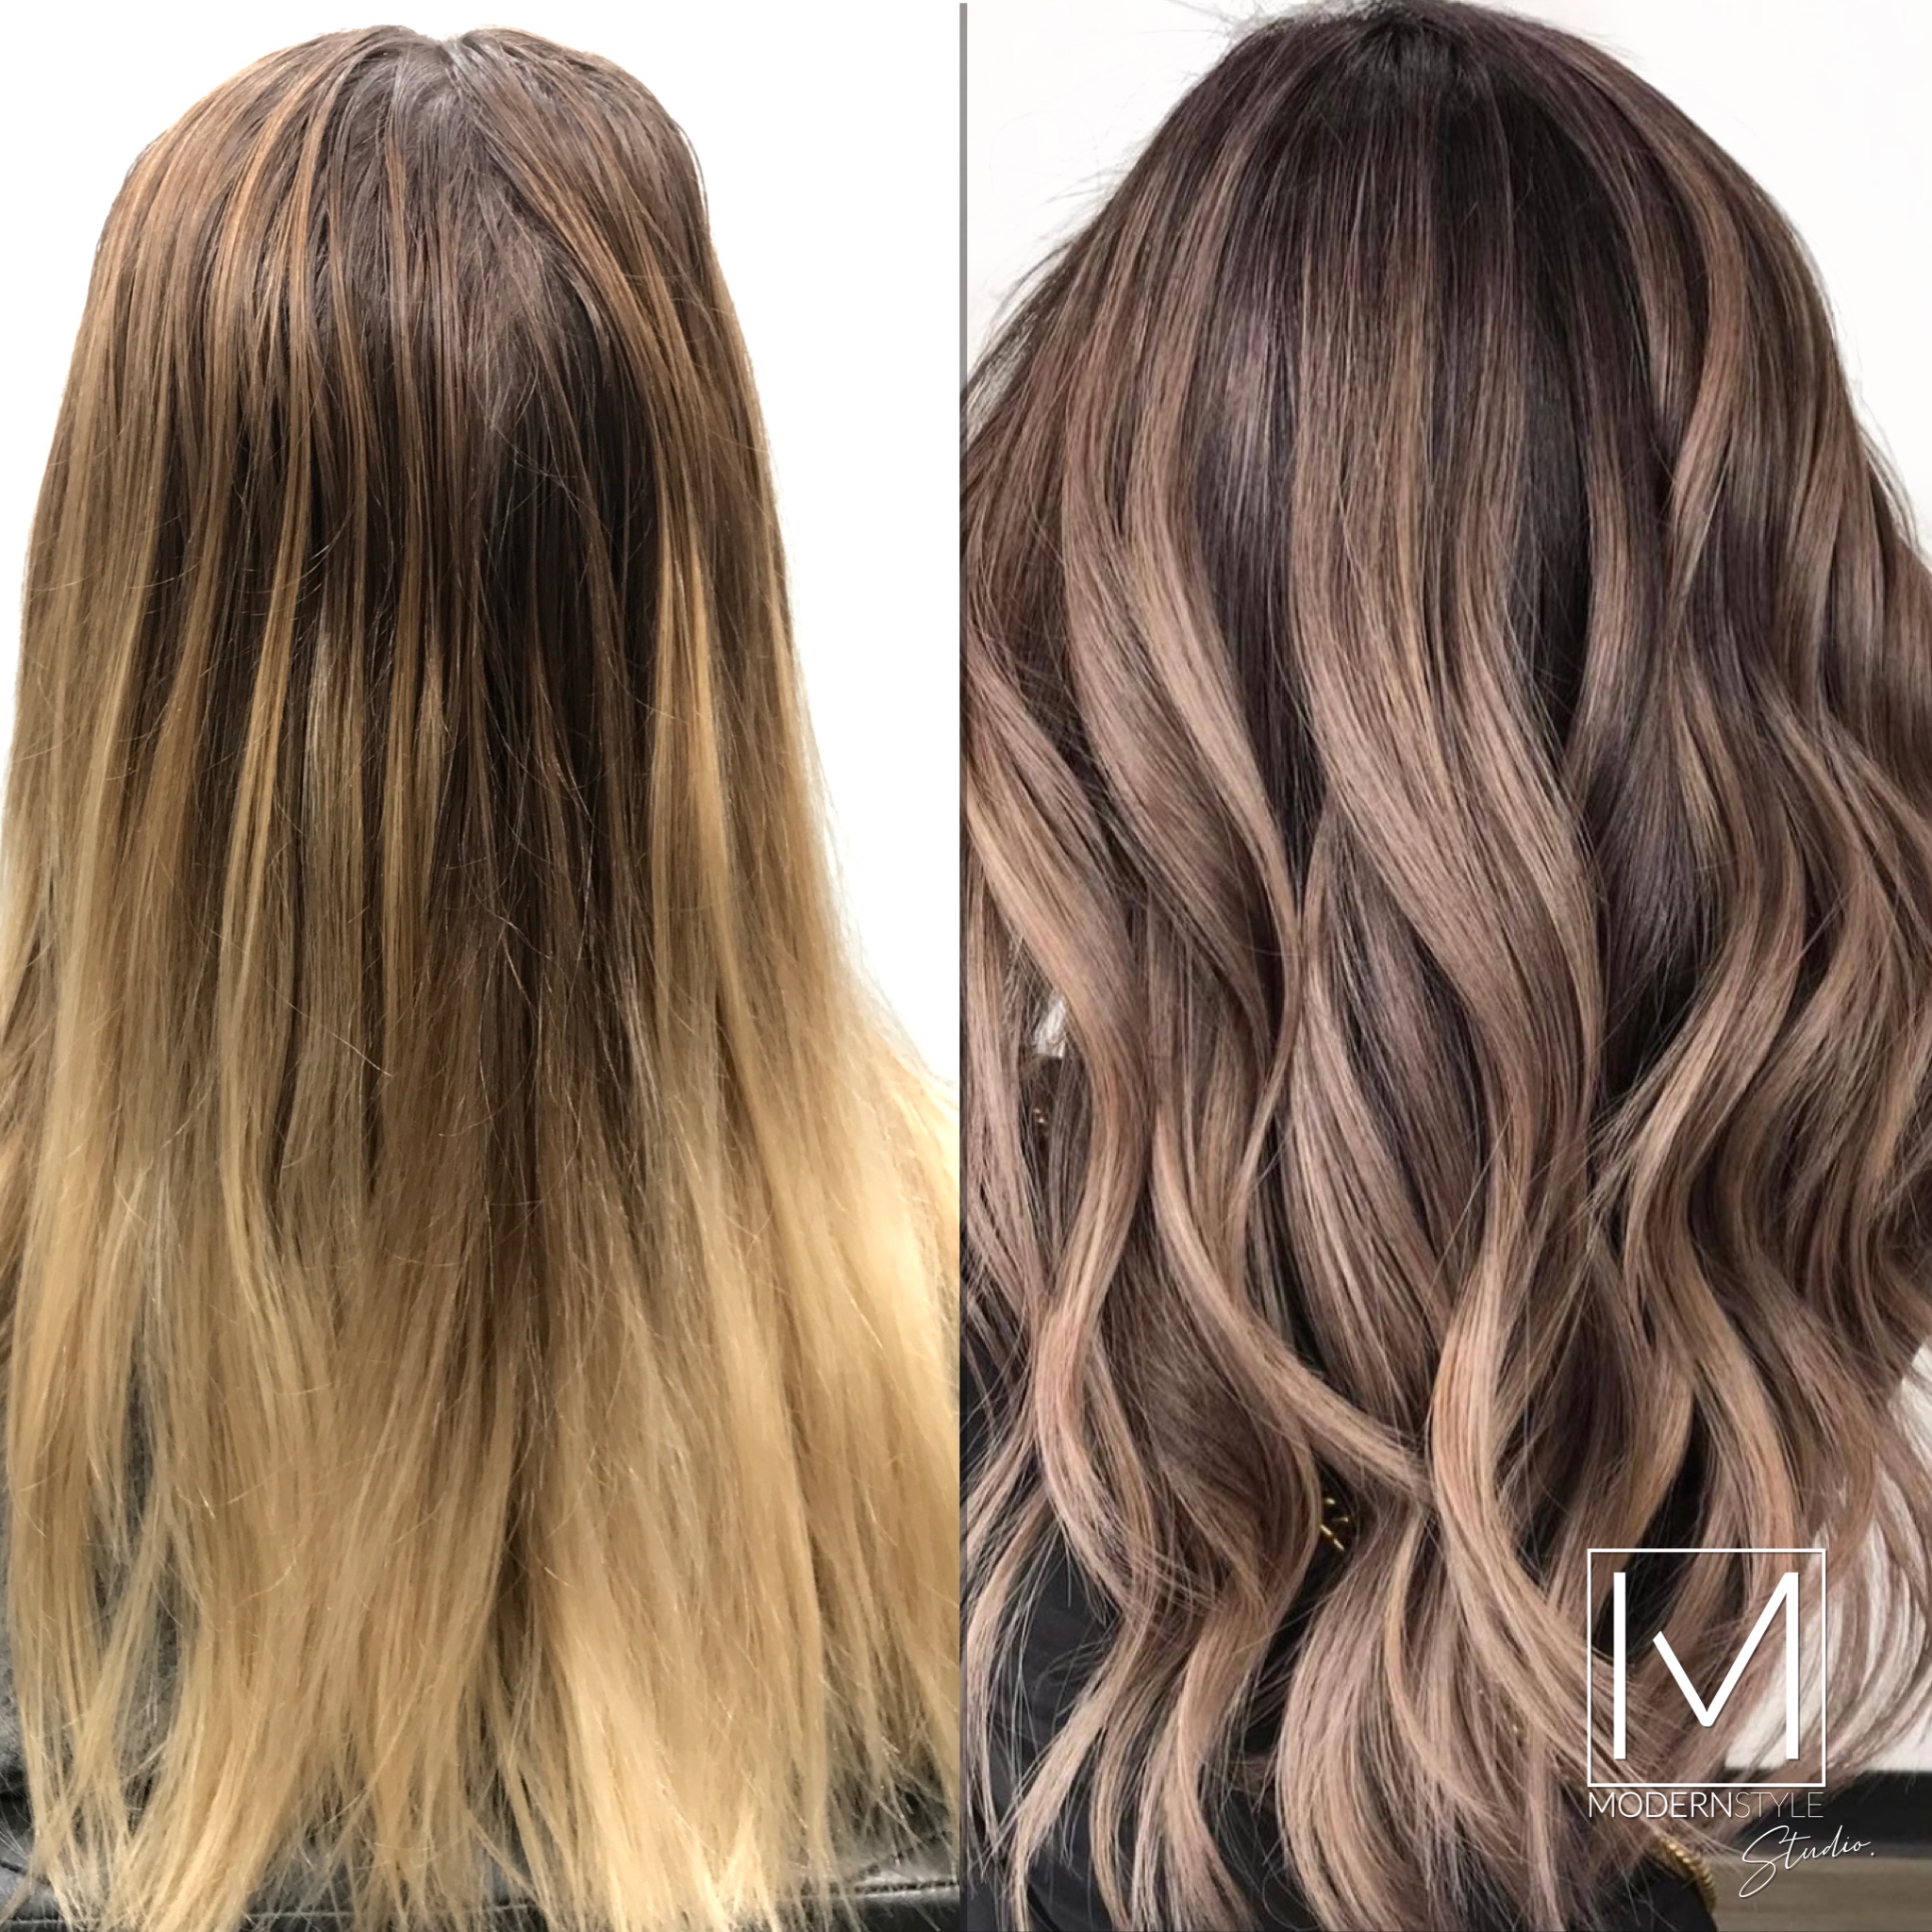 Color Correction specialist near me, color correction, color correction Charlotte, top hair colorist near me, top hair salons near me, hair salons near me, best balayage near me, balayage near me, Olaplex salon near me, master colorists near me, top rated salons near me